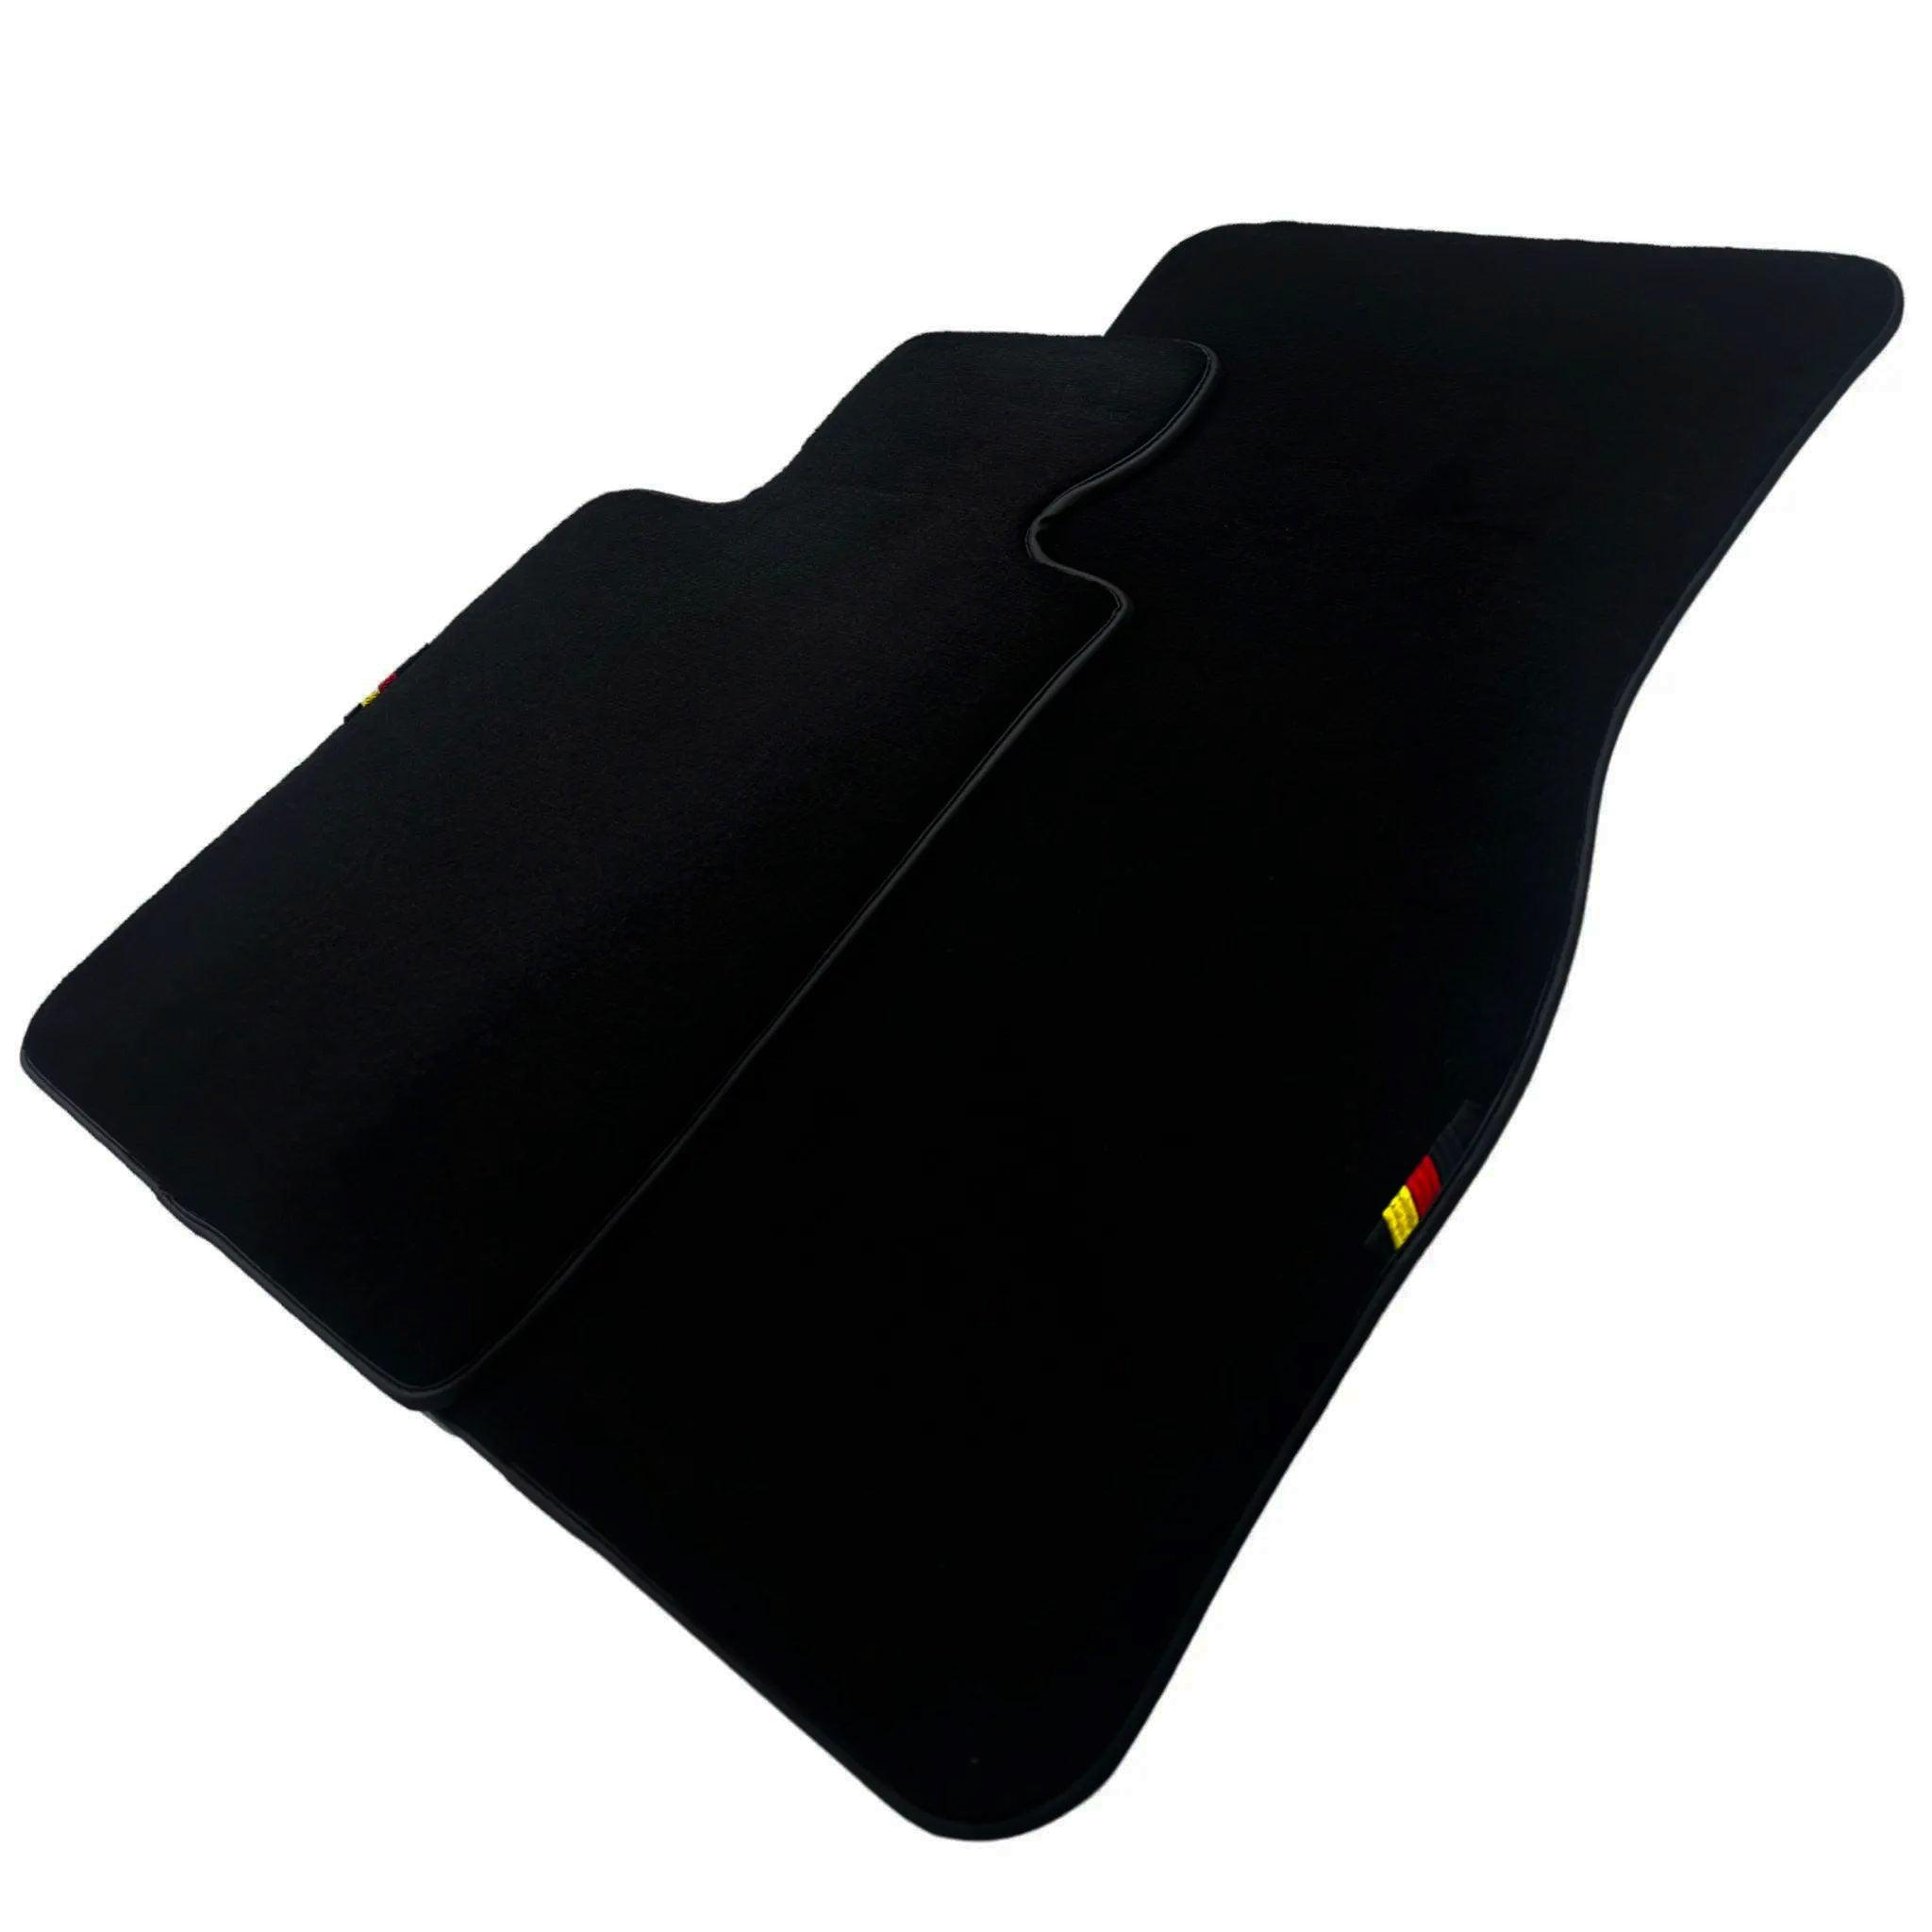 Black Floor Mats For BMW 5 Series G30 with German Flag